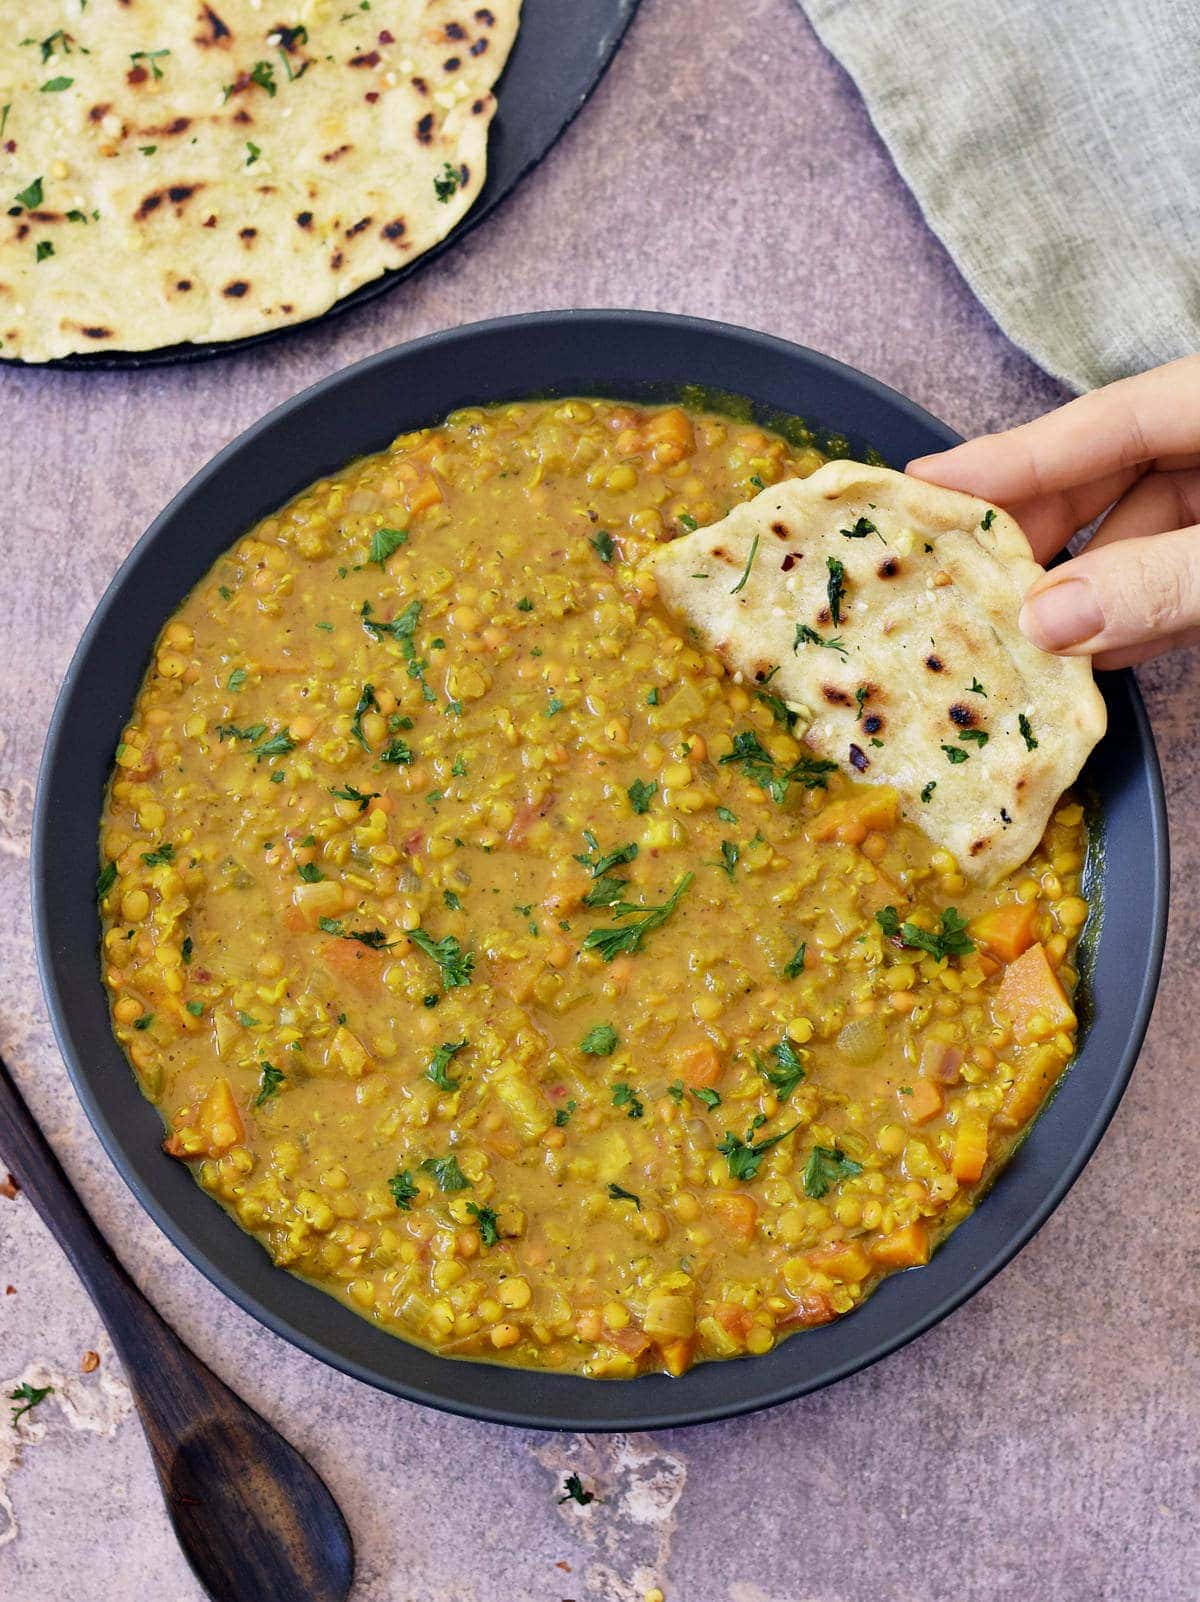 Hand dipping a piece of vegan naan bread into red lentil dahl in black bowl